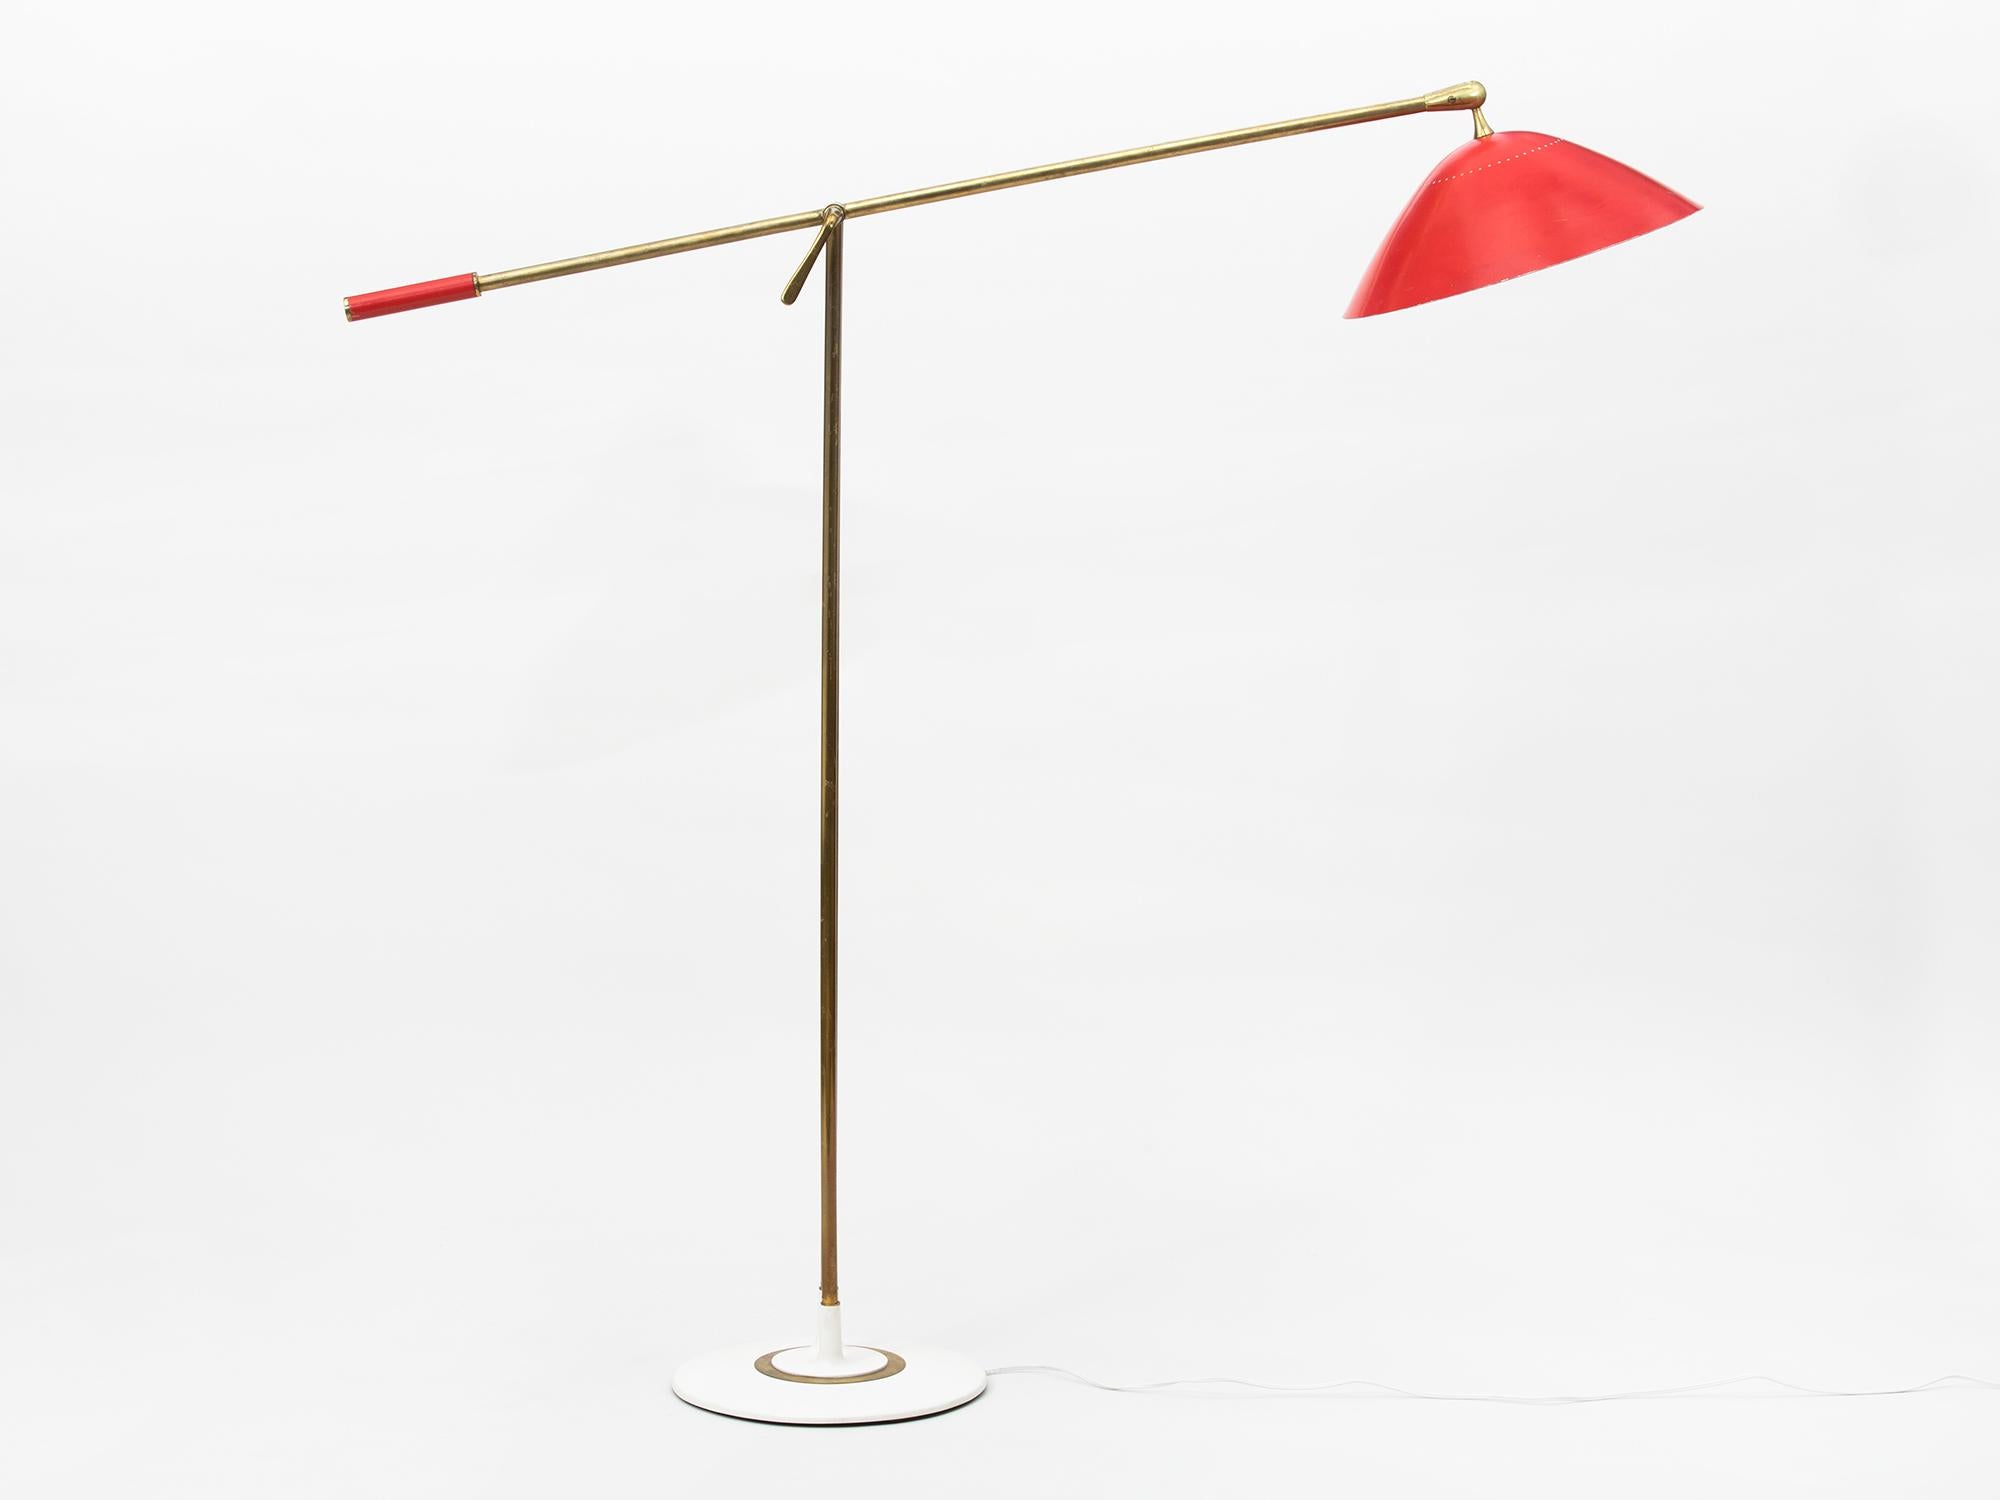 Elegant, adjustable midcentury brass floor lamp with bright red lacquered perforated metal shade and handle. The body of the lamp features beautifully rendered solid brass parts and twin brass stems. Manufactured in Milan in the 1950s by Italian